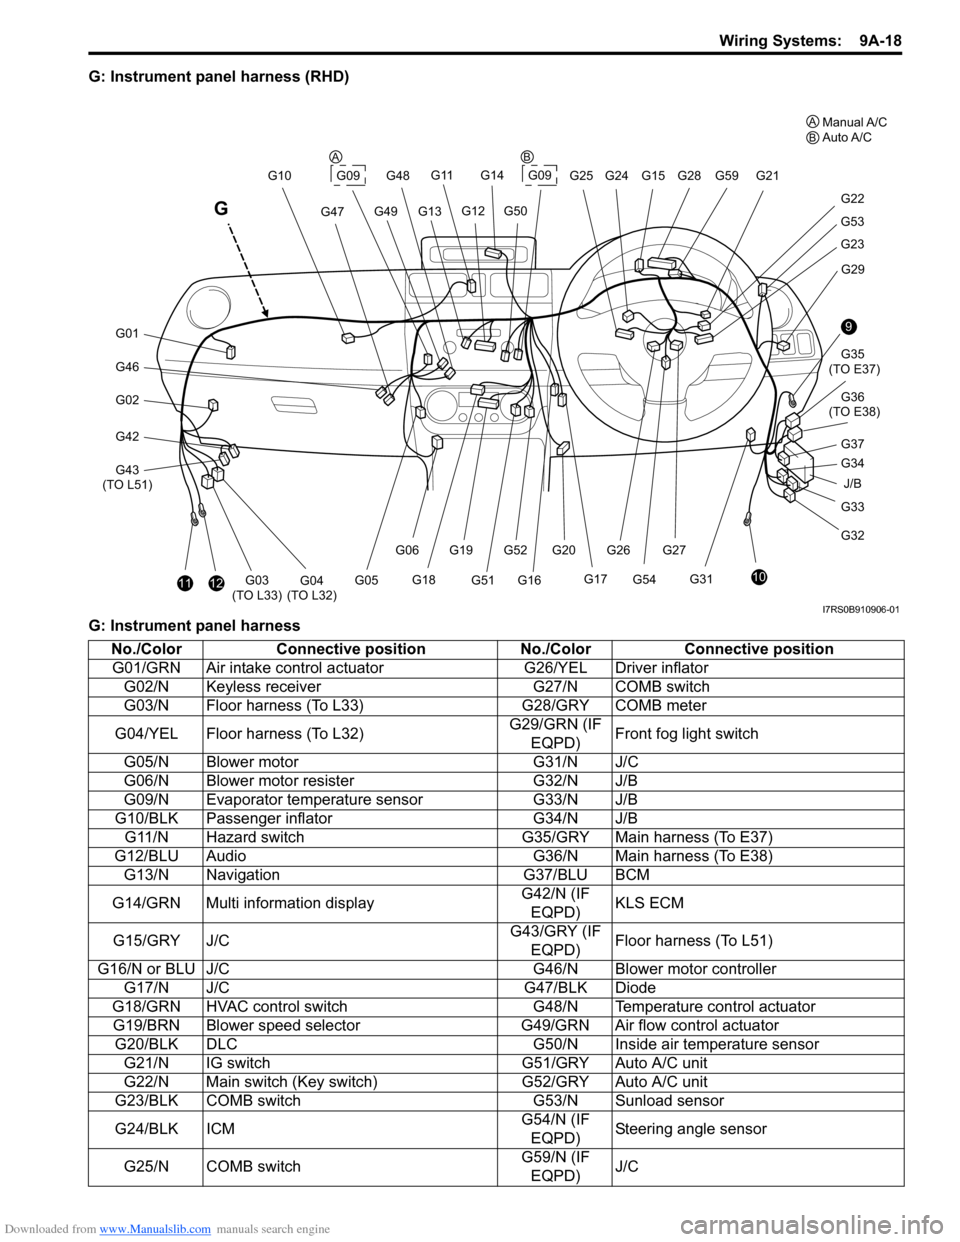 SUZUKI SWIFT 2006 2.G Service Workshop Manual Downloaded from www.Manualslib.com manuals search engine Wiring Systems:  9A-18
G: Instrument panel harness (RHD)
G: Instrument panel harness
J/B
9
10
G33
G32 G34 G35
 (TO E37)
G36
 (TO E38)
G31 G29
G